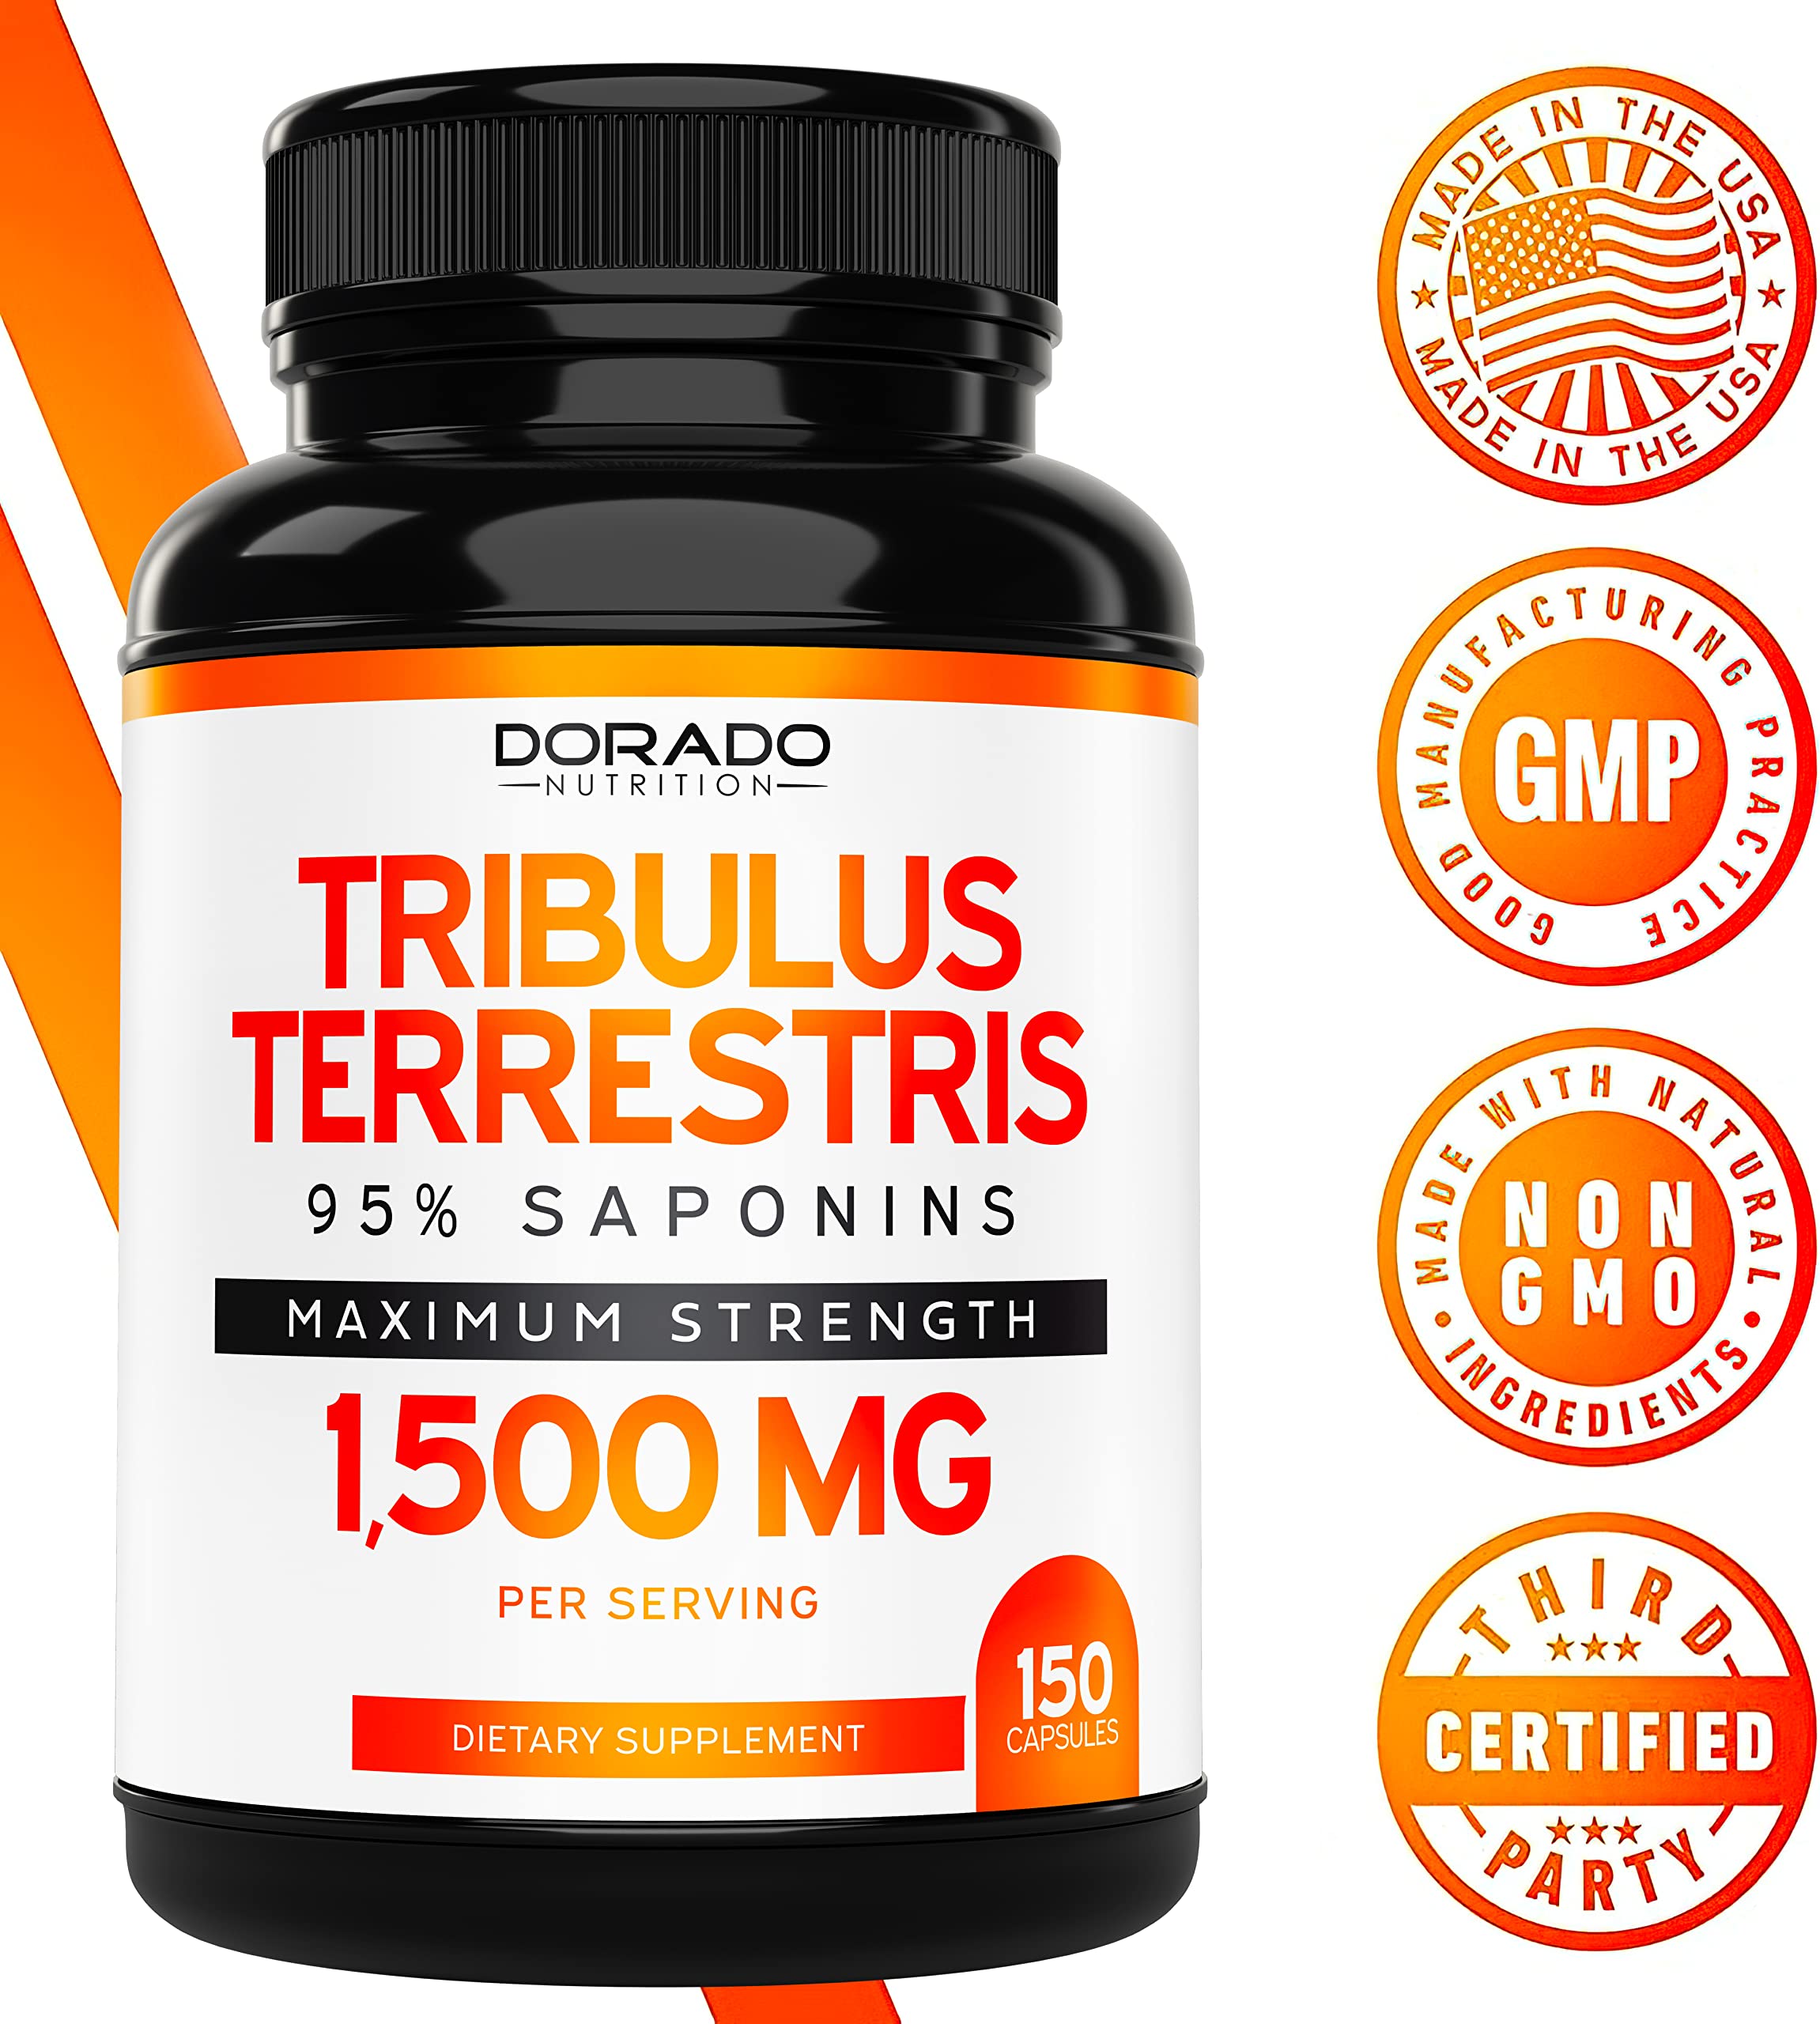 Tribulus Terrestris for Men 1500mg (Purest 95% Saponin Content) 150 Capsules, Concentrated Natural Fruit Extract (Third Party Tested, Manufactured in The USA) for Stamina and Energy - Vegan & Non GMO